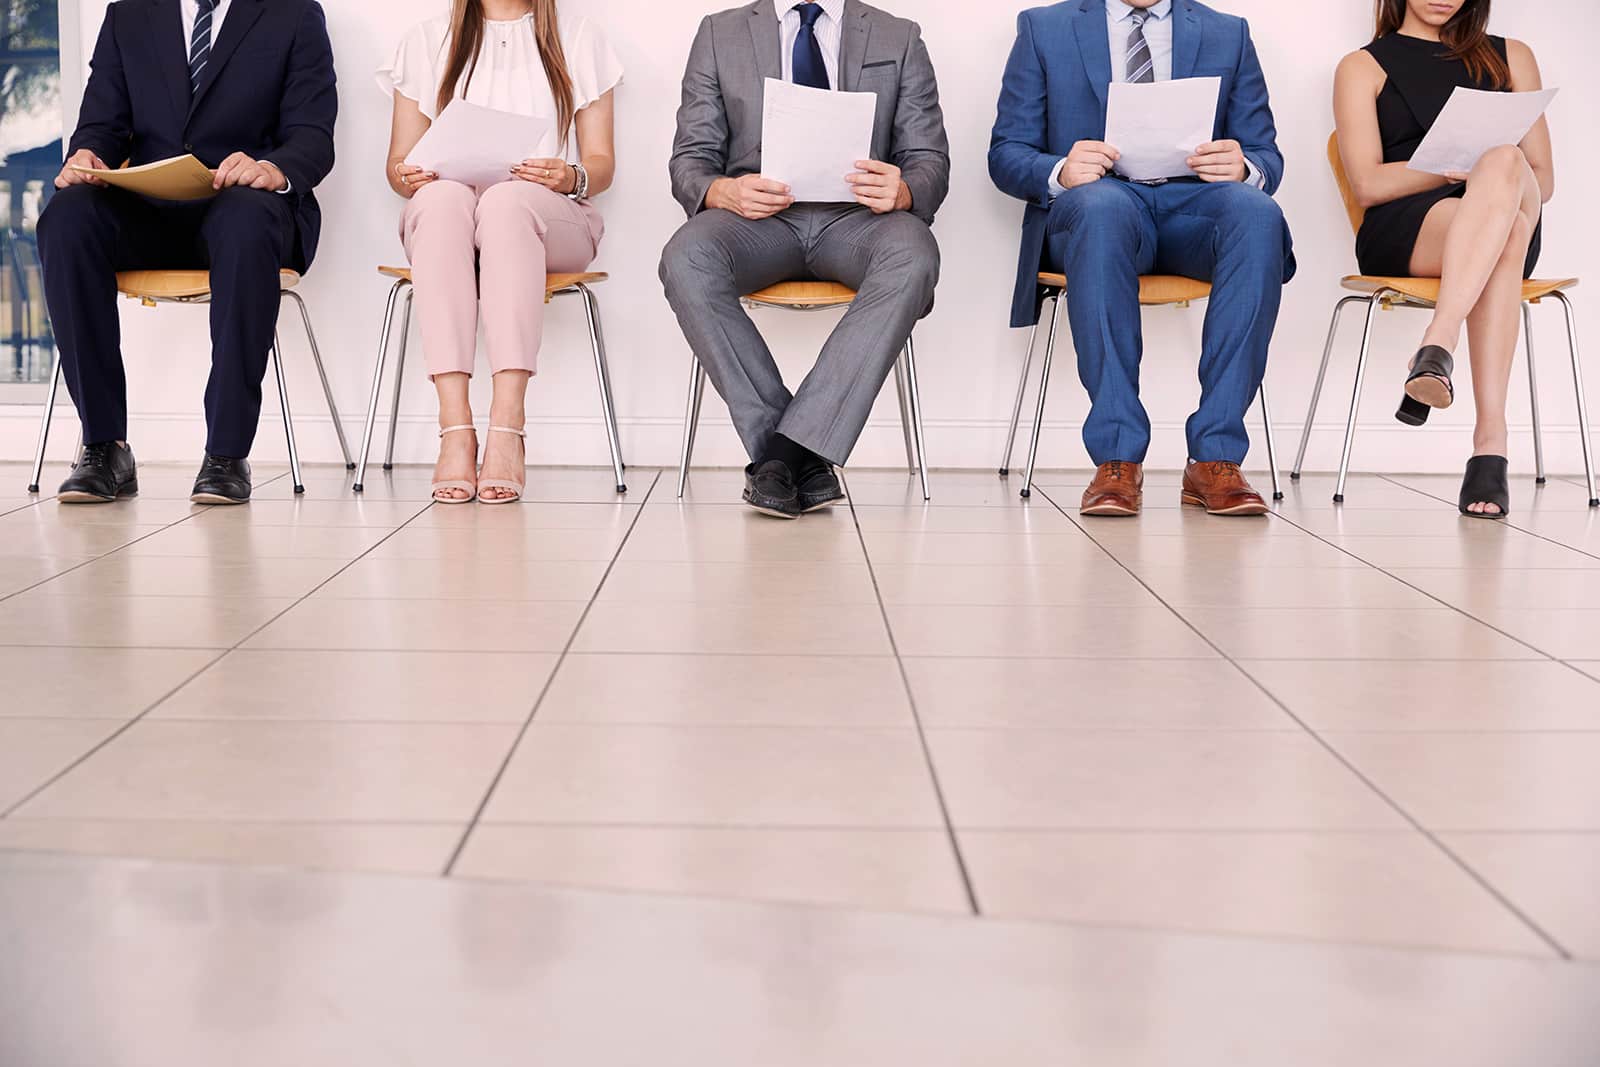 What To Do At Your Next In-Person Interview